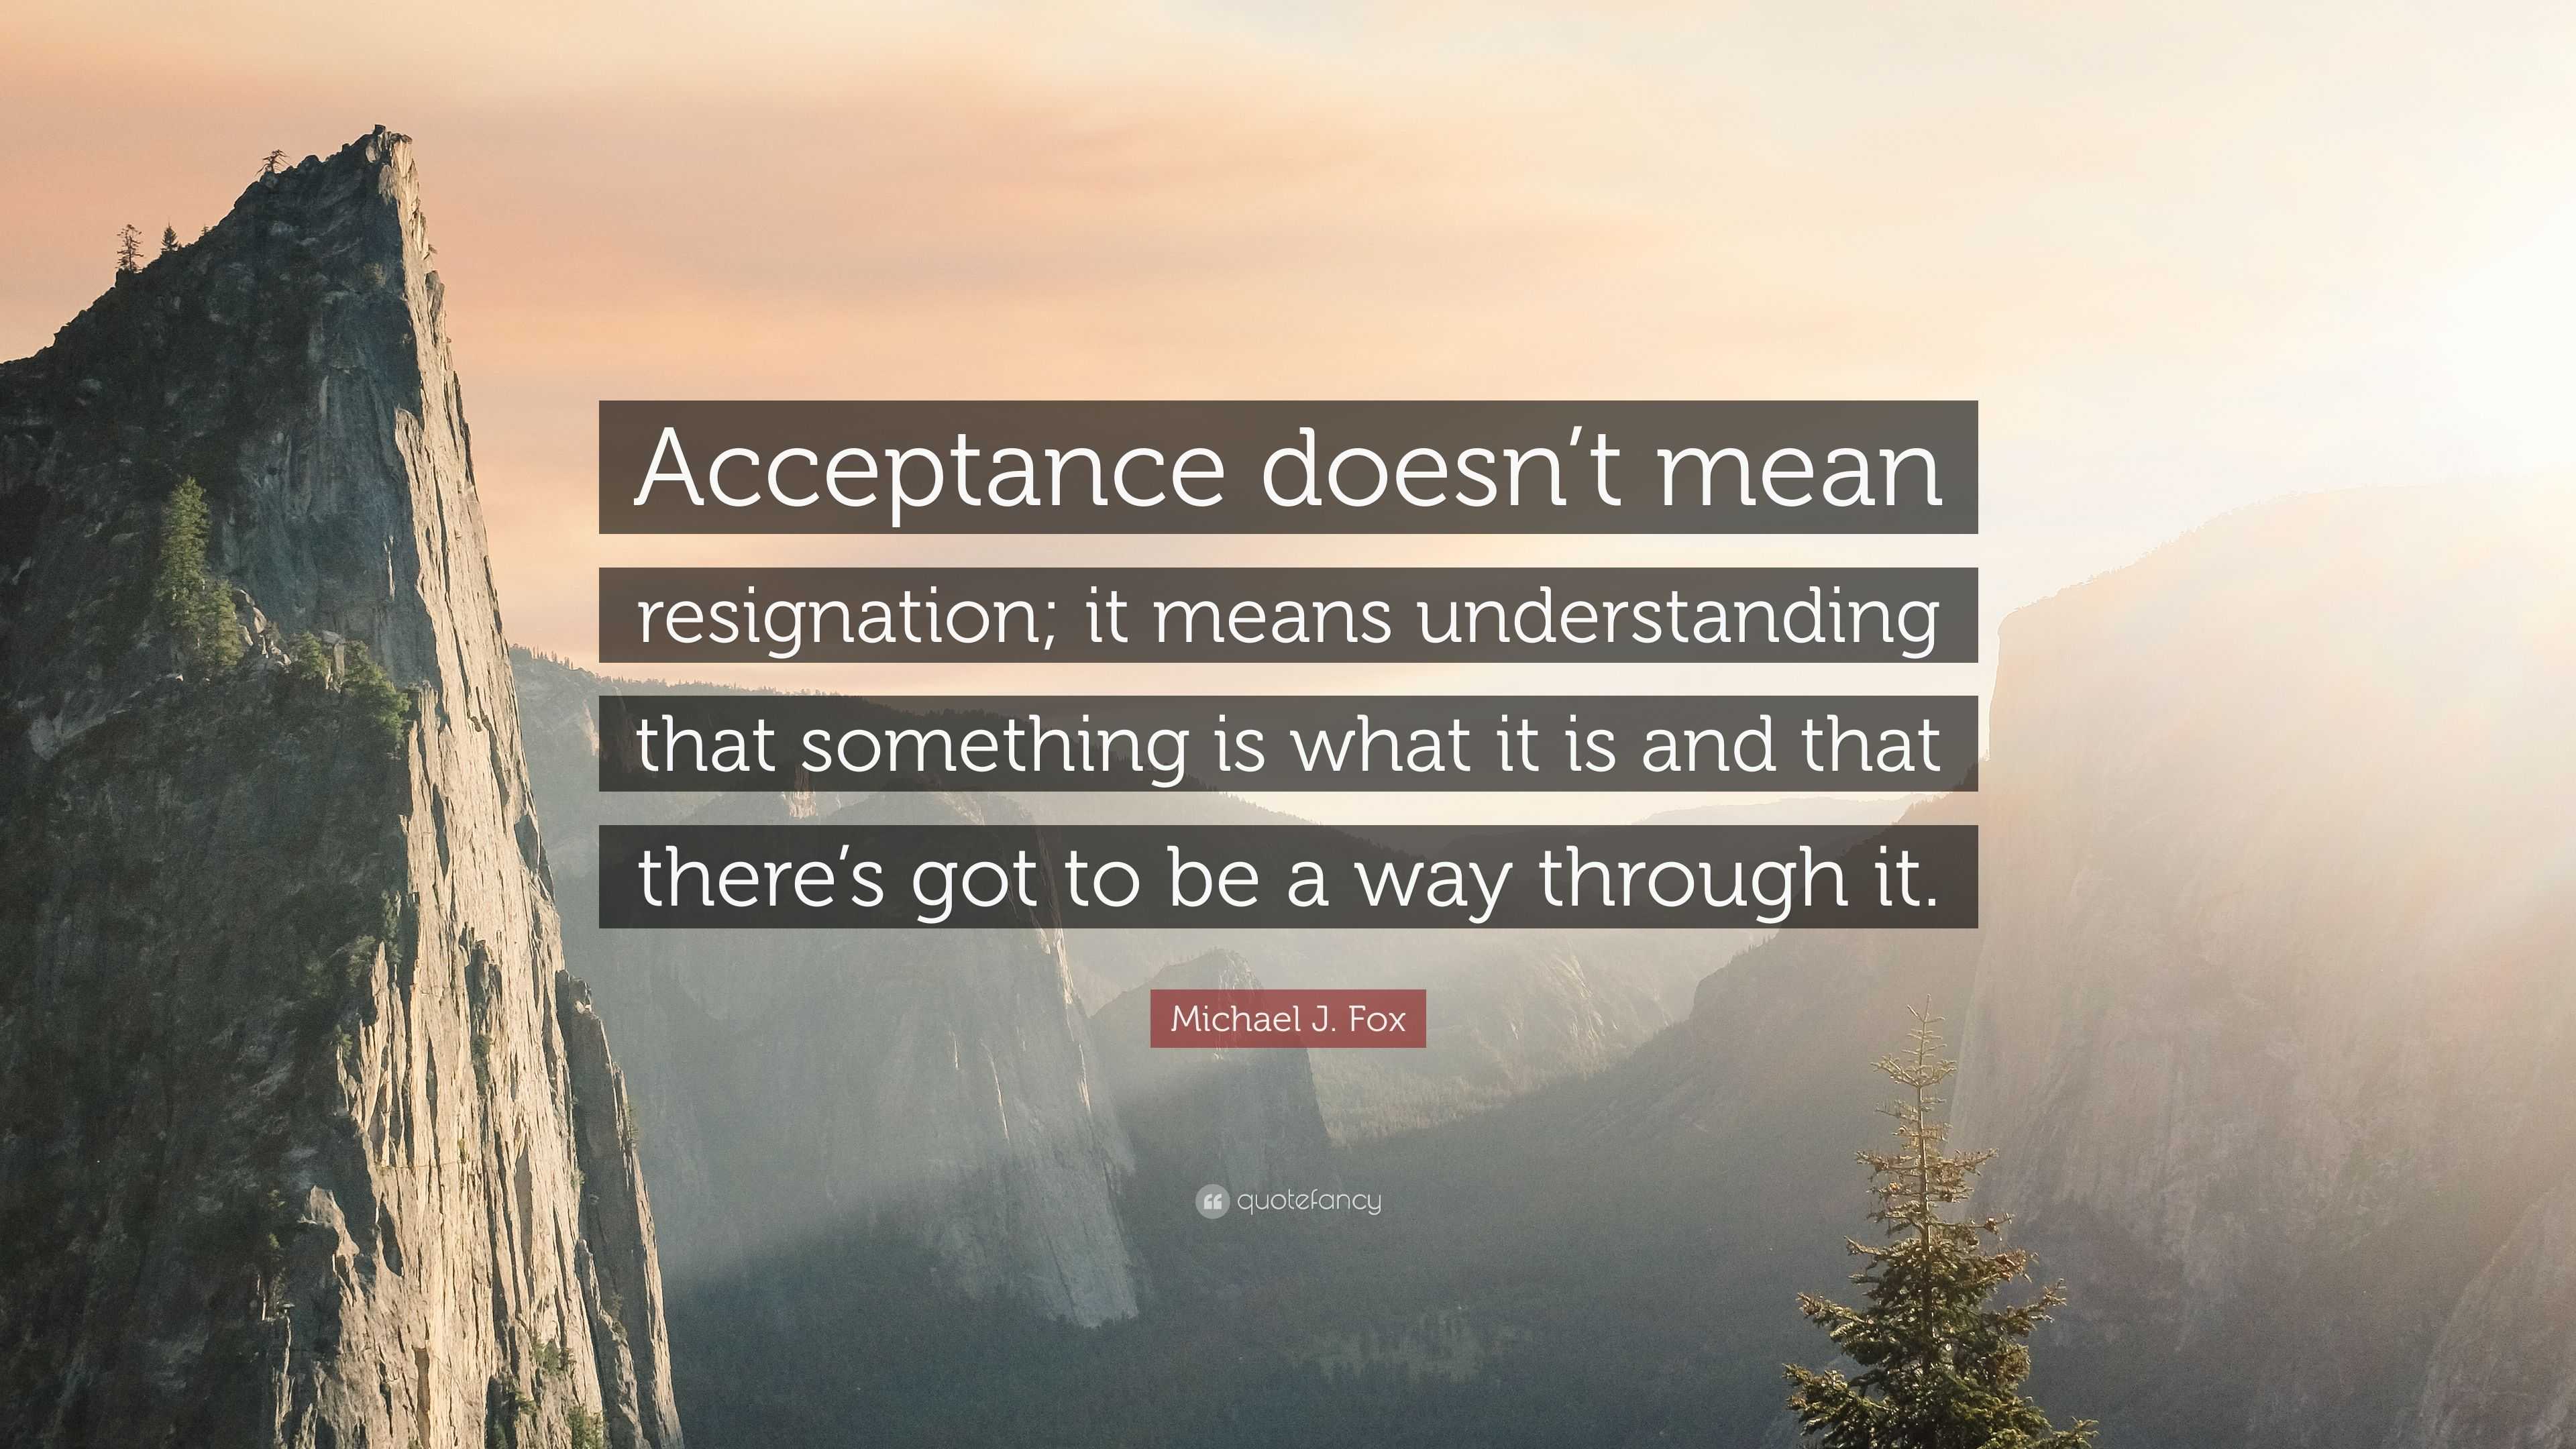 Michael J. Fox Quote: “Acceptance doesn’t mean resignation; it means ...